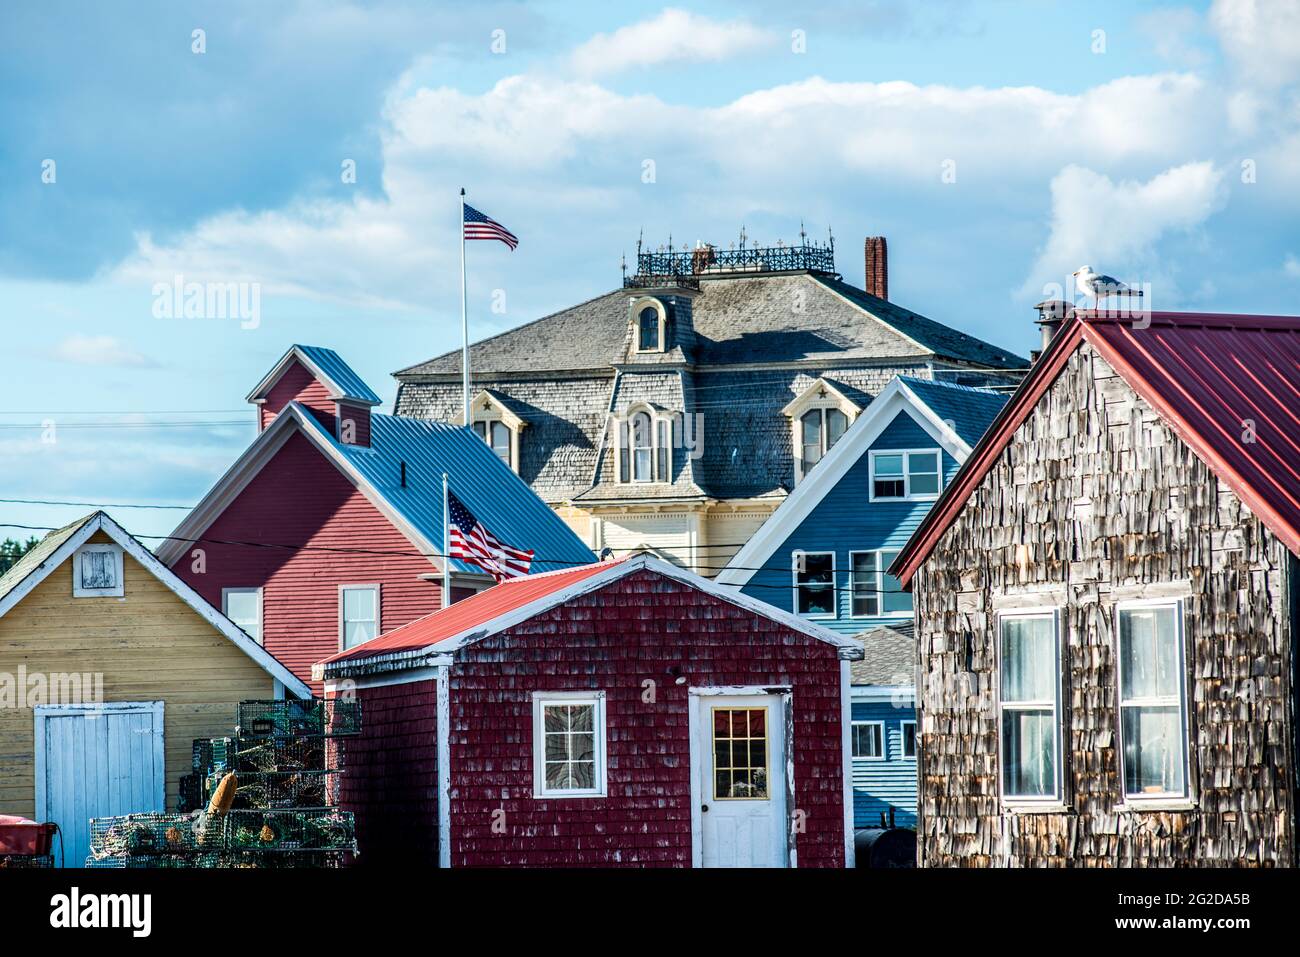 Rooflines of Fishing Shacks, Houses, and Star of Hope Lodge, Vinalhaven Island, Maine, USA Foto Stock